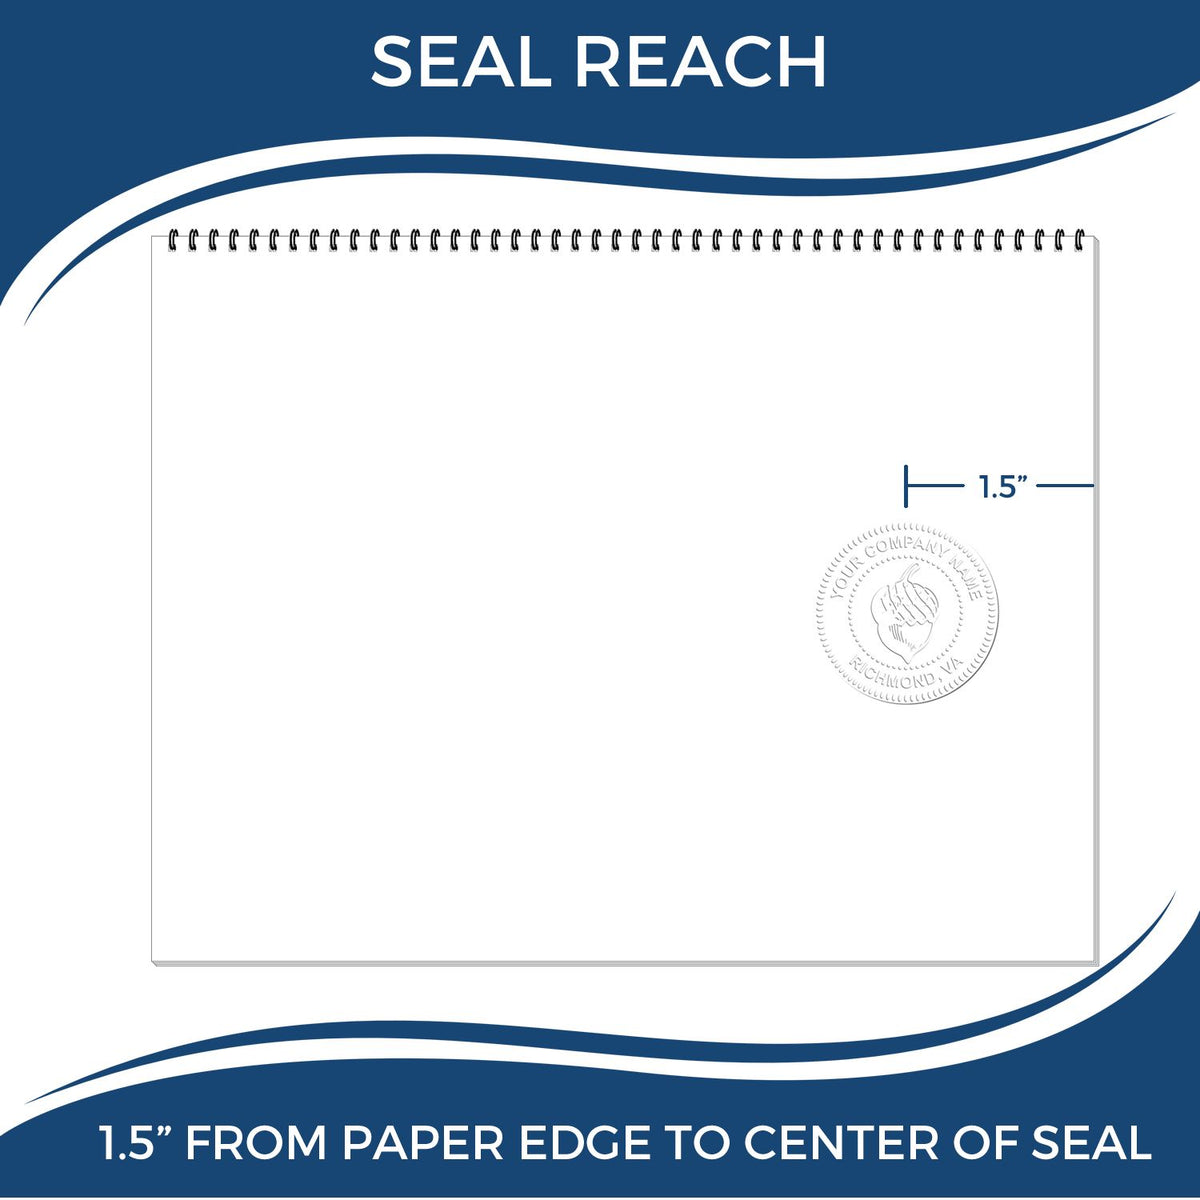 An infographic showing the seal reach which is represented by a ruler and a miniature seal image of the Handheld Maryland Professional Engineer Embosser